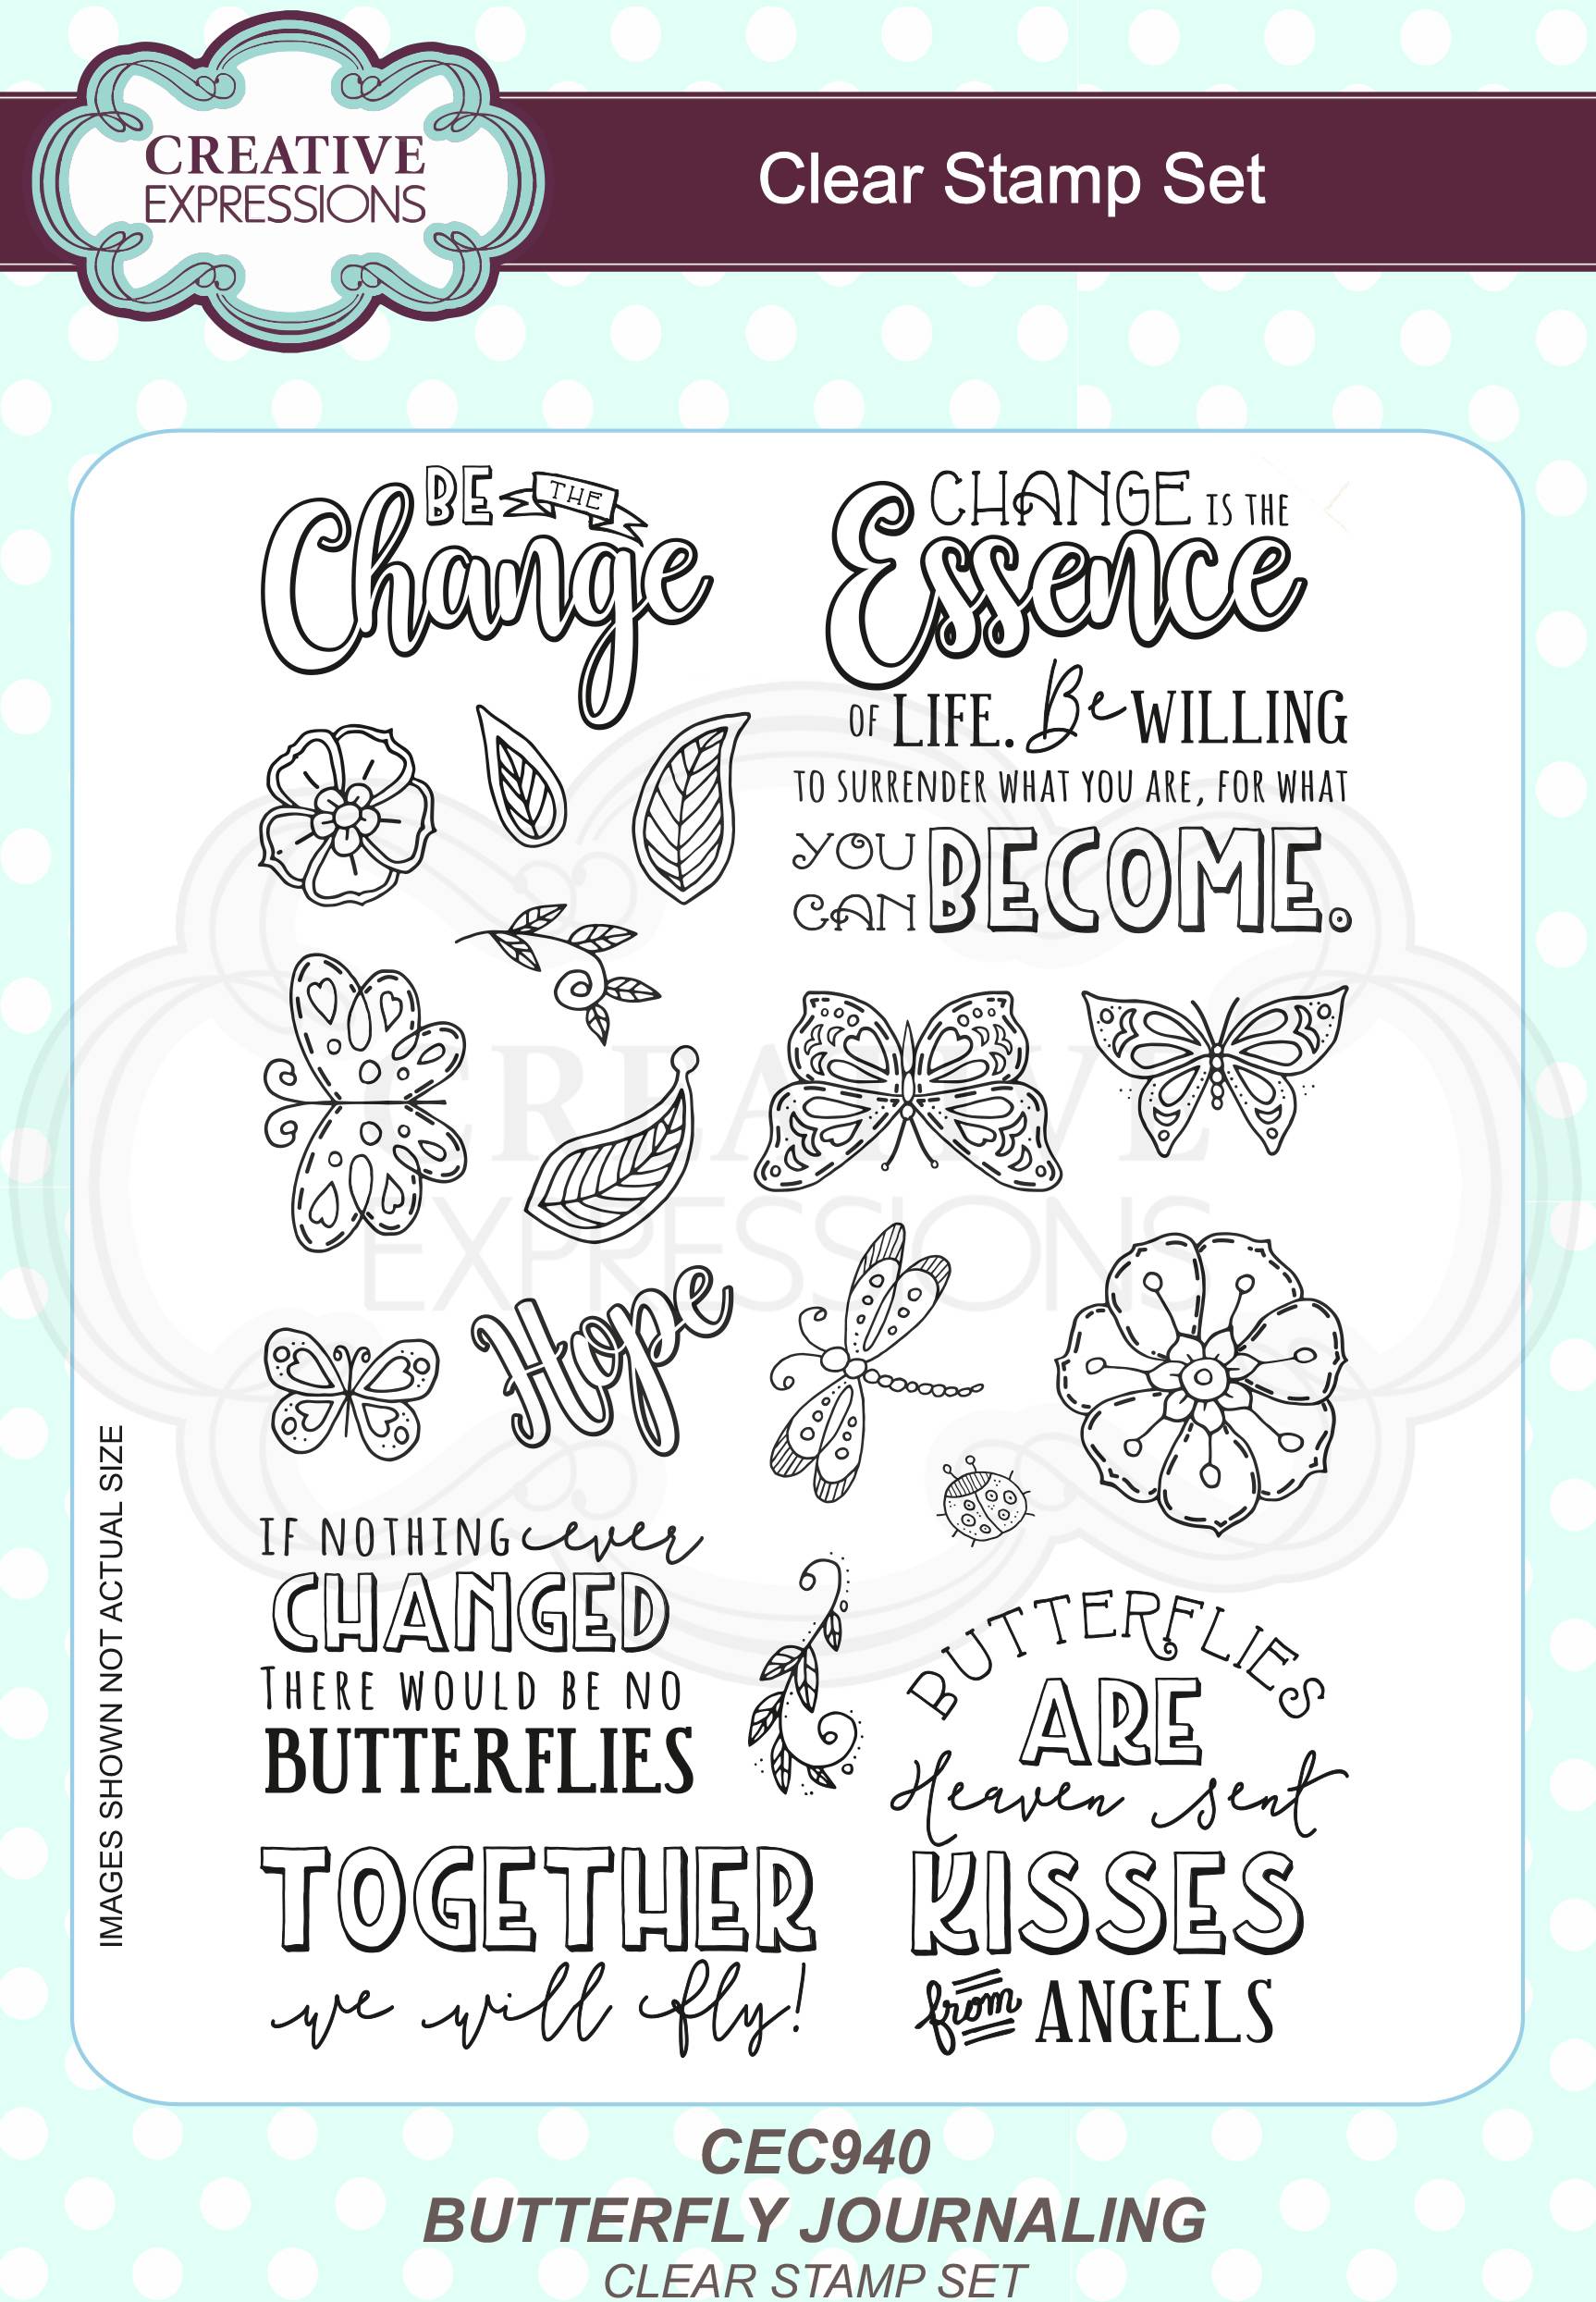 Creative Expressions Butterfly Journaling Clear Stamp Set